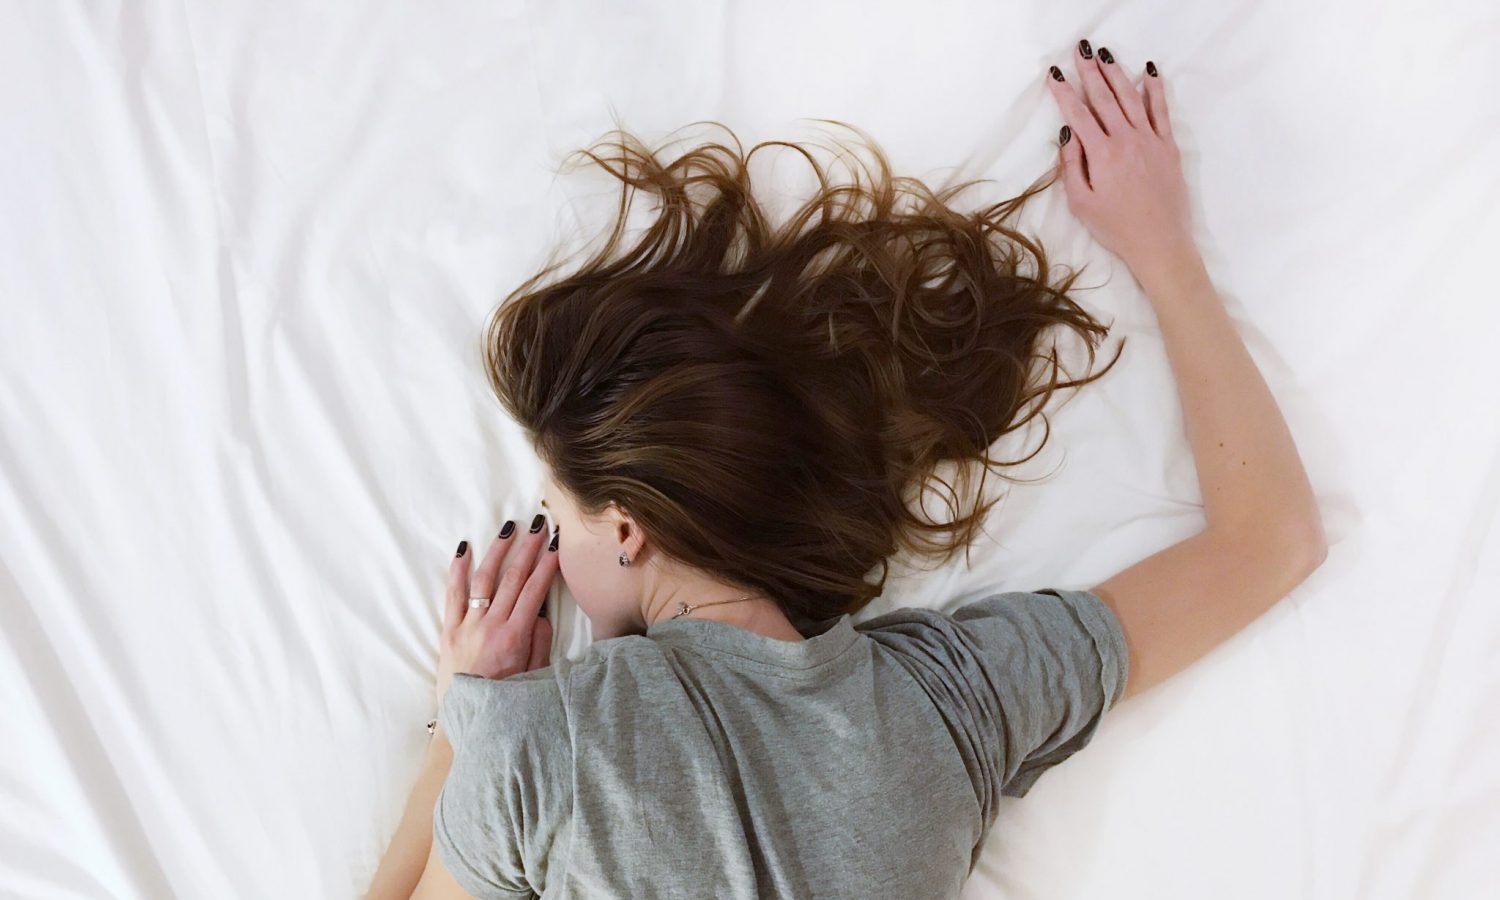 This Hack Can Provide More Morning Energy